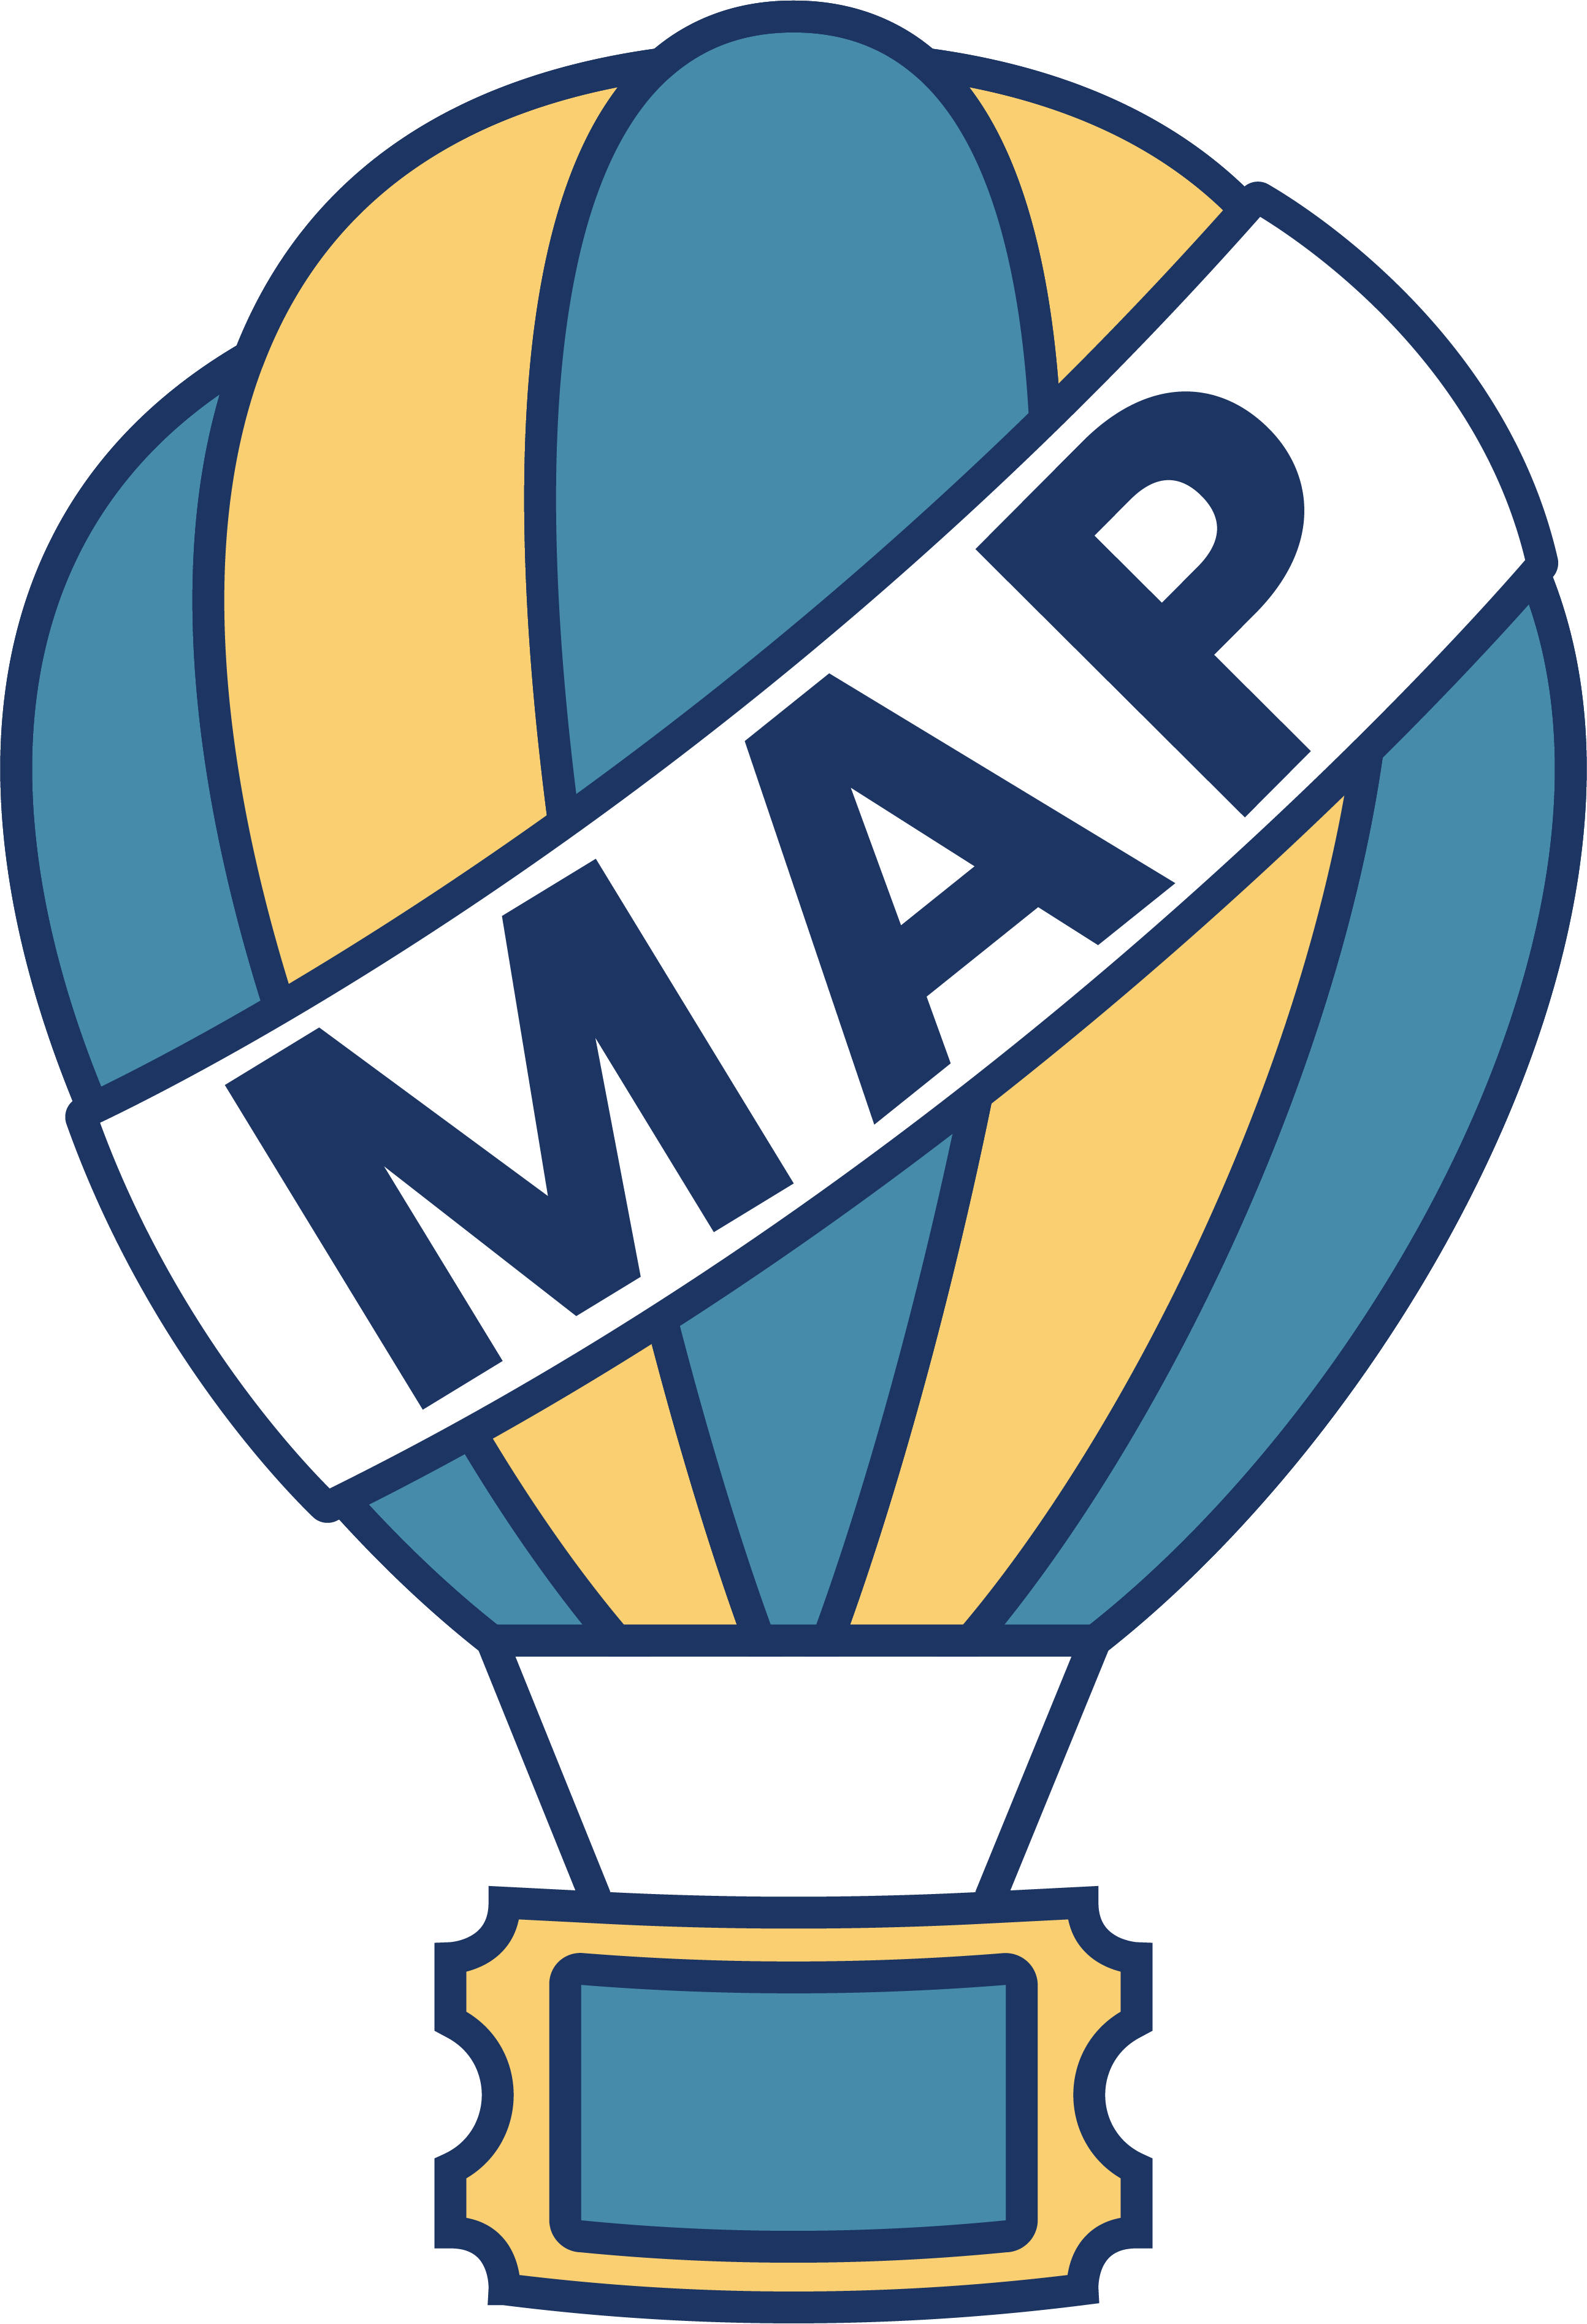 Map Your Adventure!